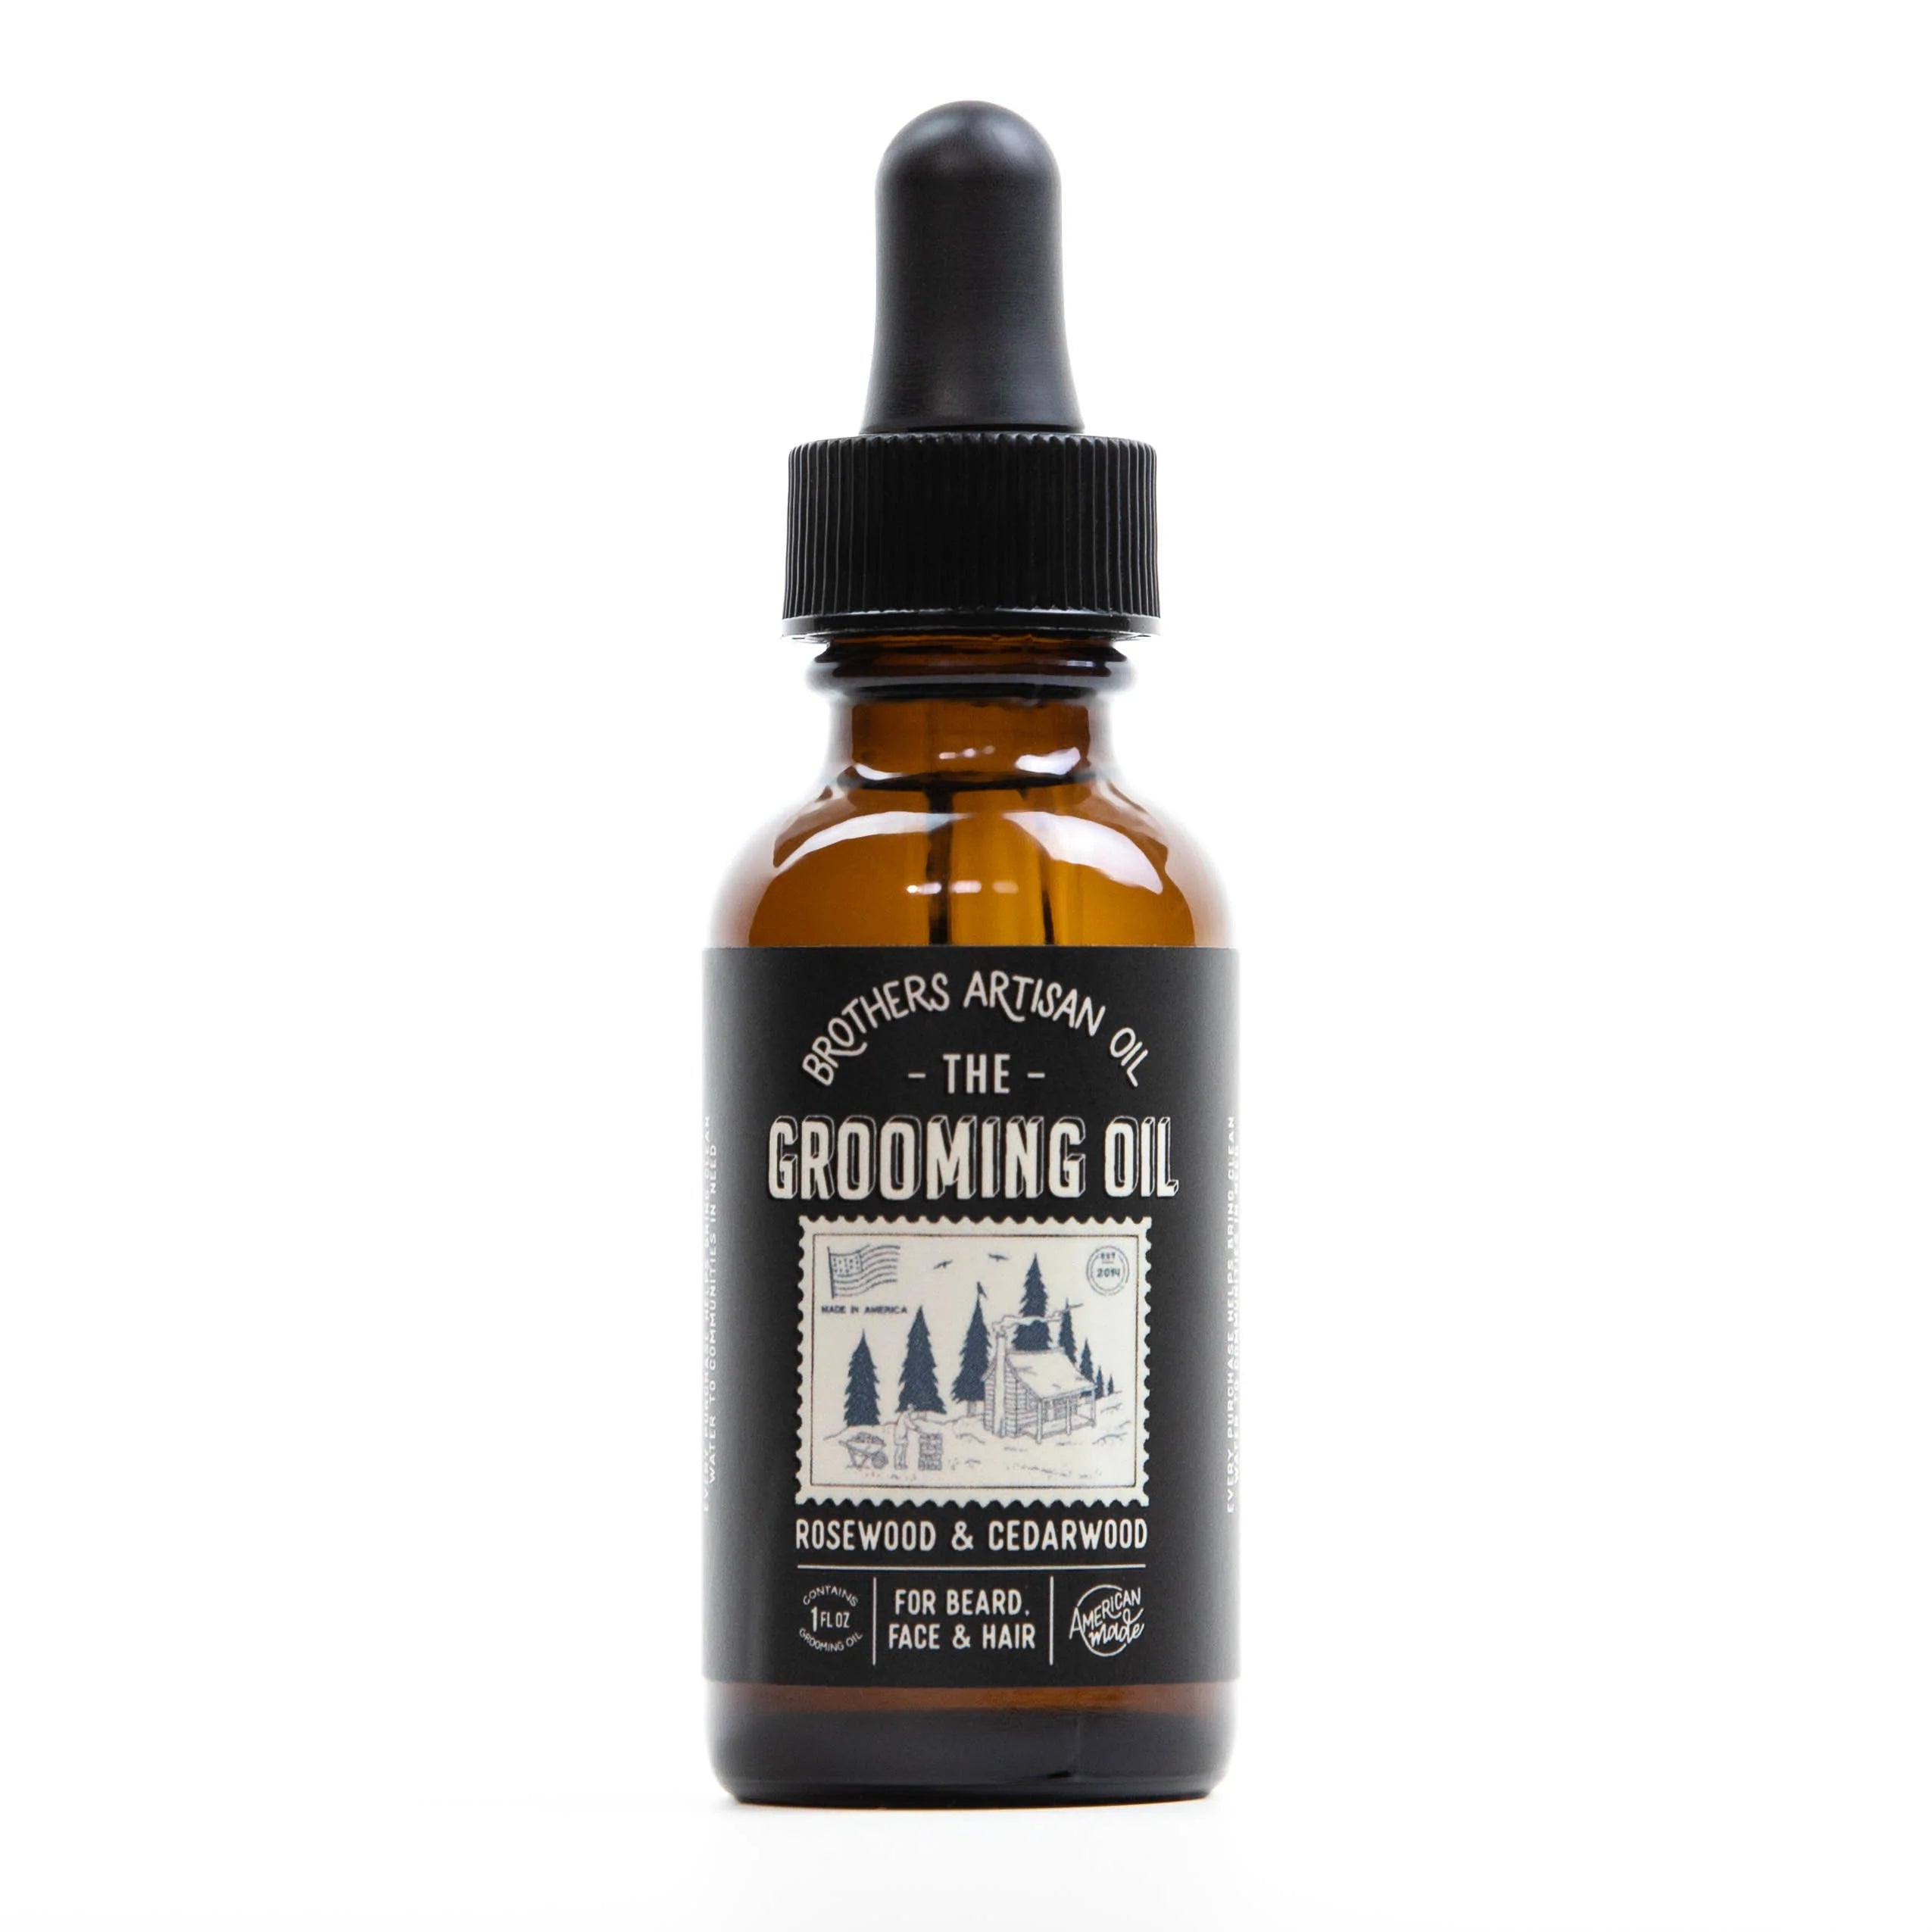  The Grooming Oil: Rosewood & Cedarwood by Brothers Artisan Oil Brothers Artisan Oil Perfumarie